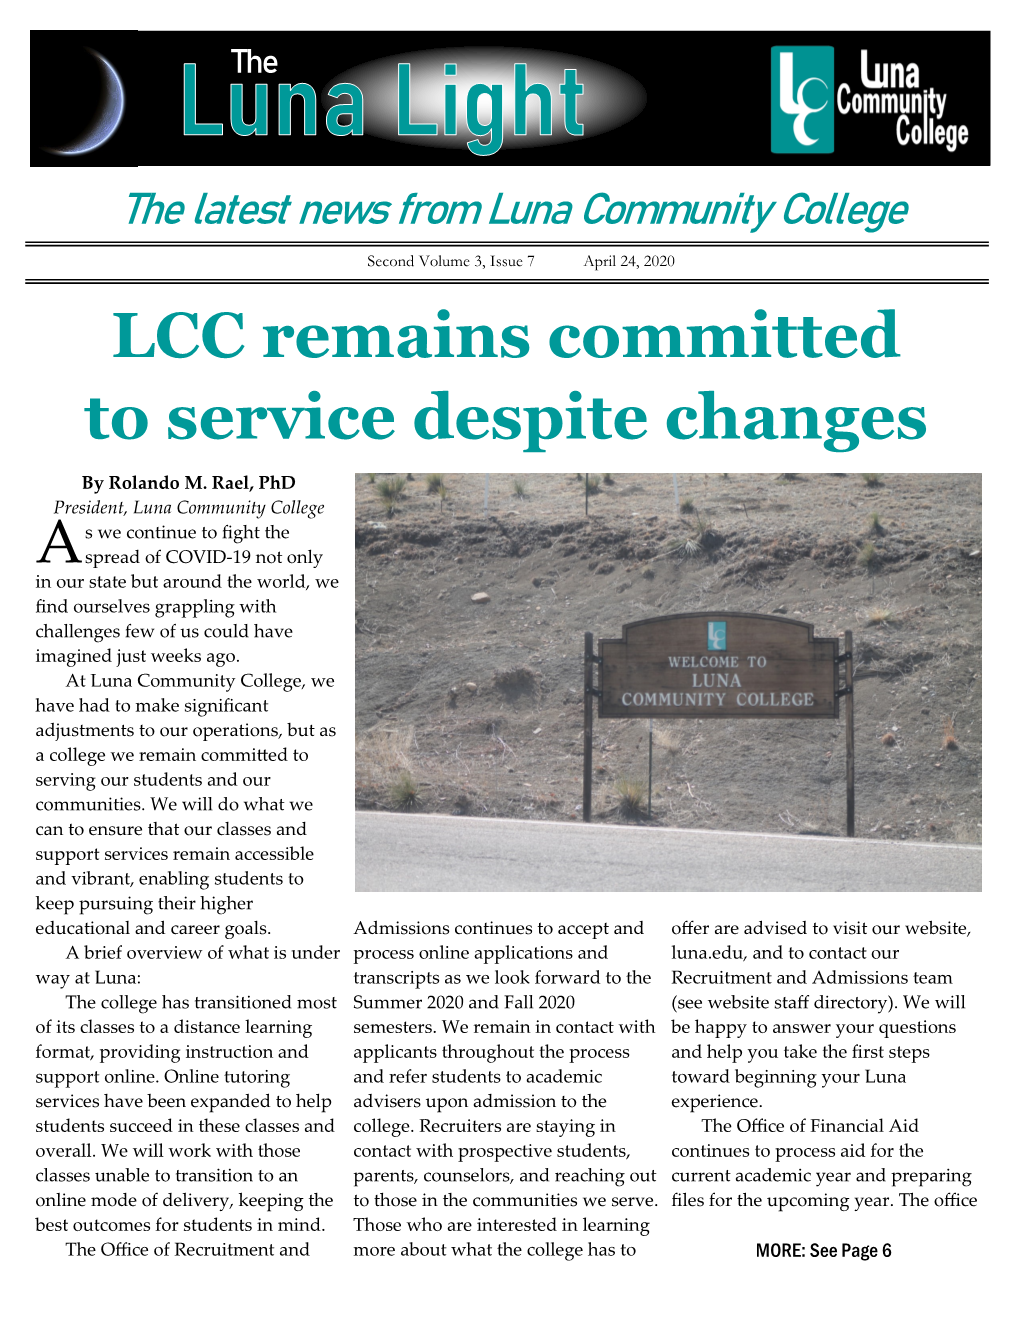 Second Volume 3, Issue 7 April 24, 2020 LCC Remains Committed to Service Despite Changes